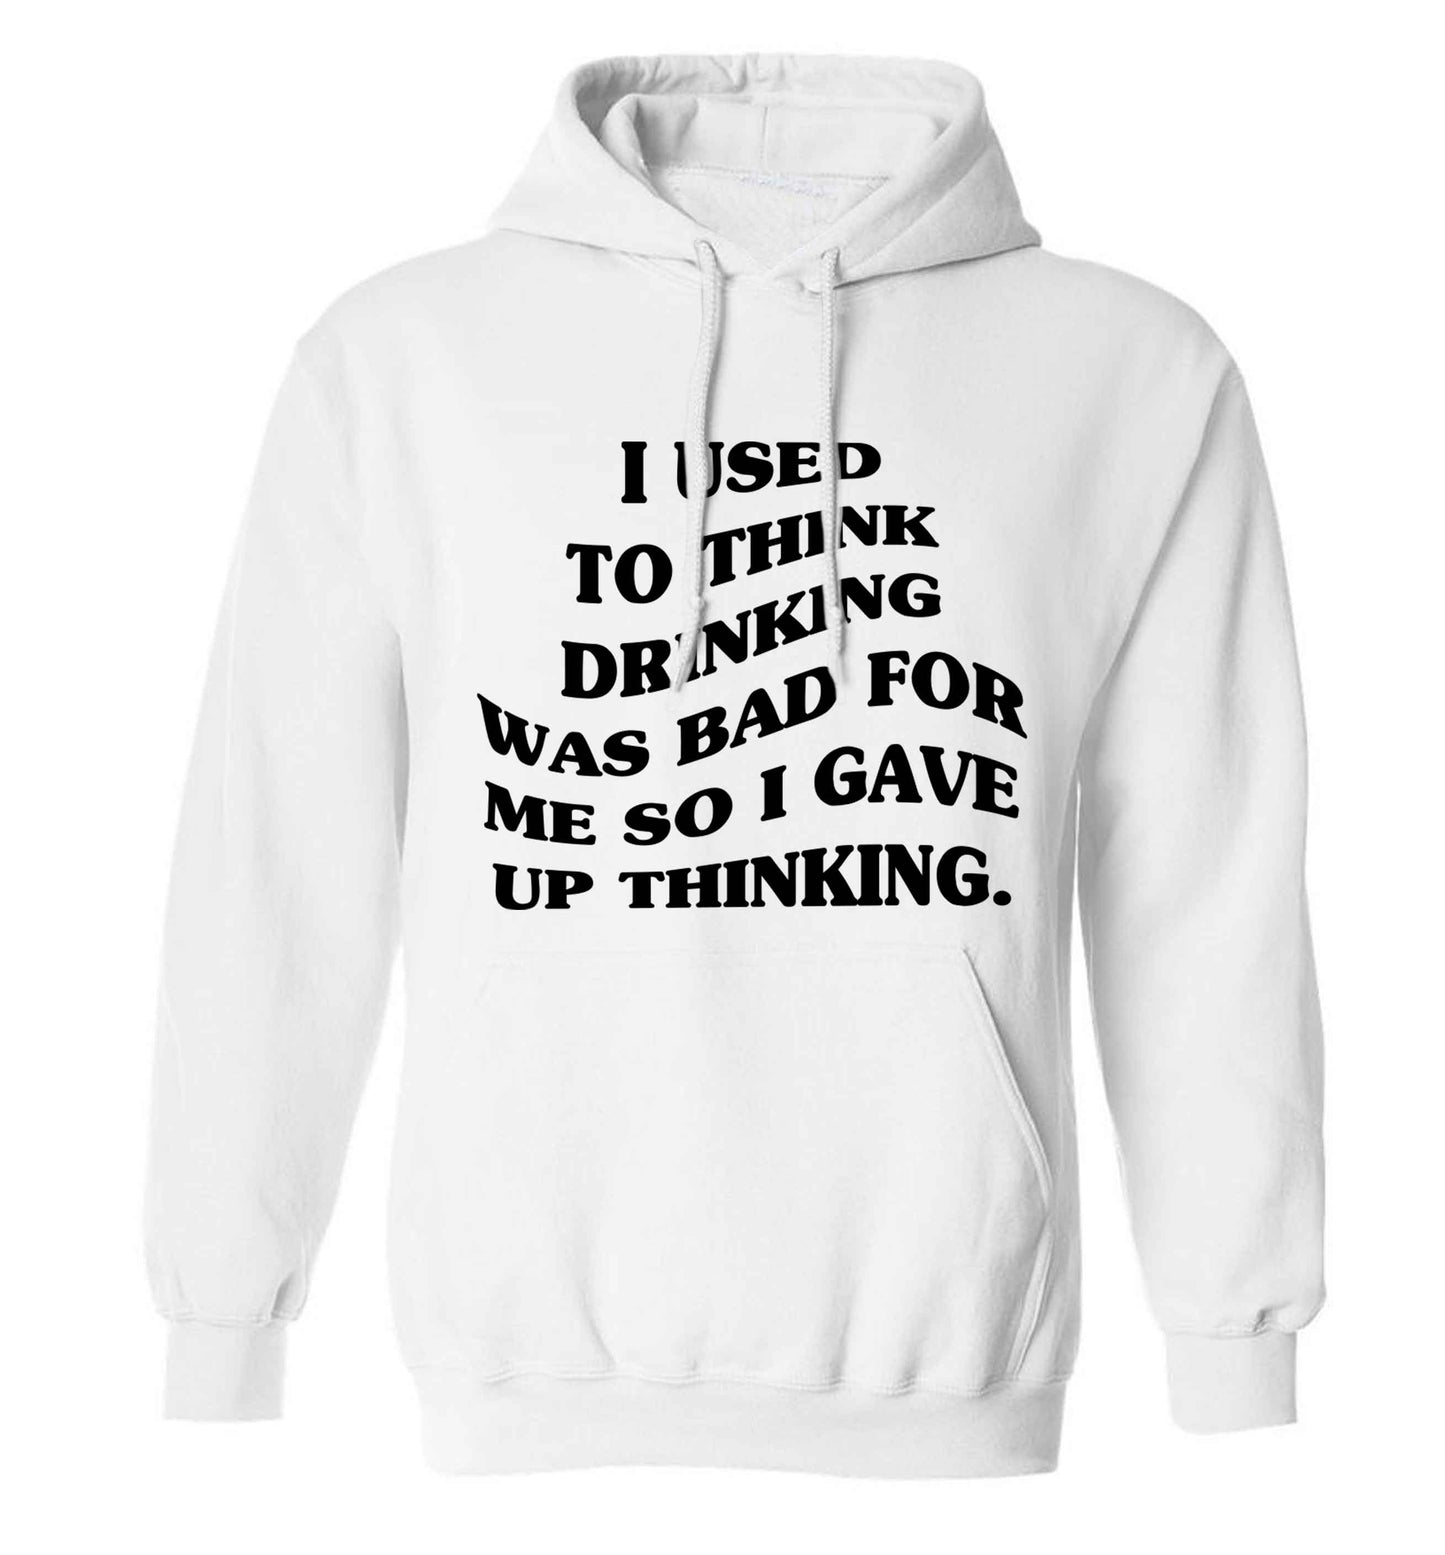 I used to think drinking was bad so I gave up thinking adults unisex white hoodie 2XL